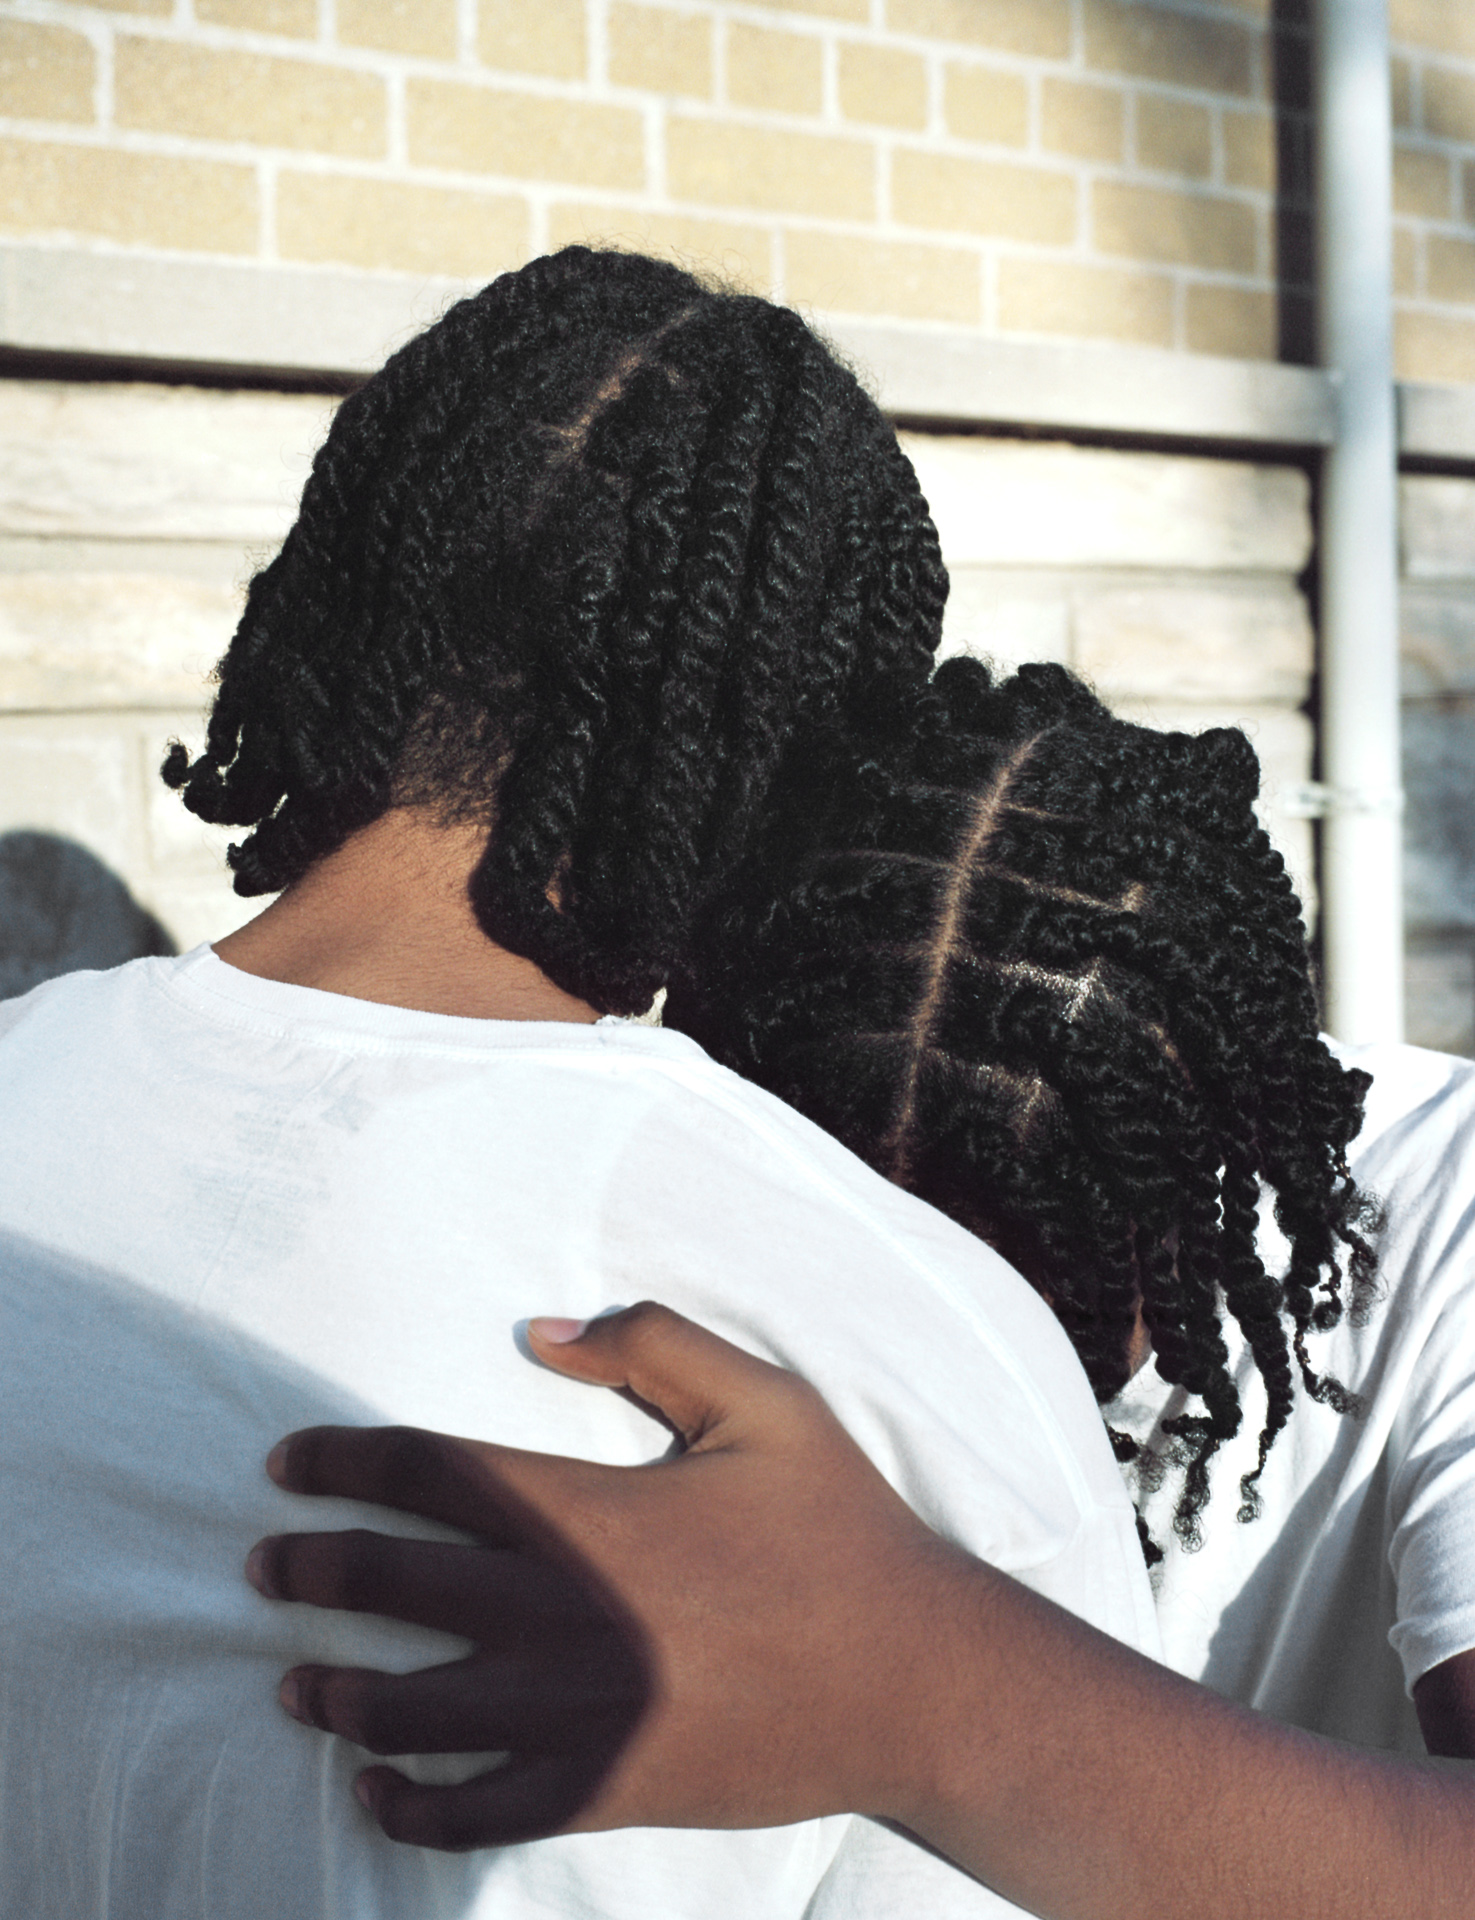 Acceptance: Nathan and Jare, both Black men with mid-length twisted hair are outside on a bright day. They wear white short-sleeved t-shirts and hug each other, facing away from the camera. Jare's hand on Nathan's back and the shadow of Rahim's elbow as well.